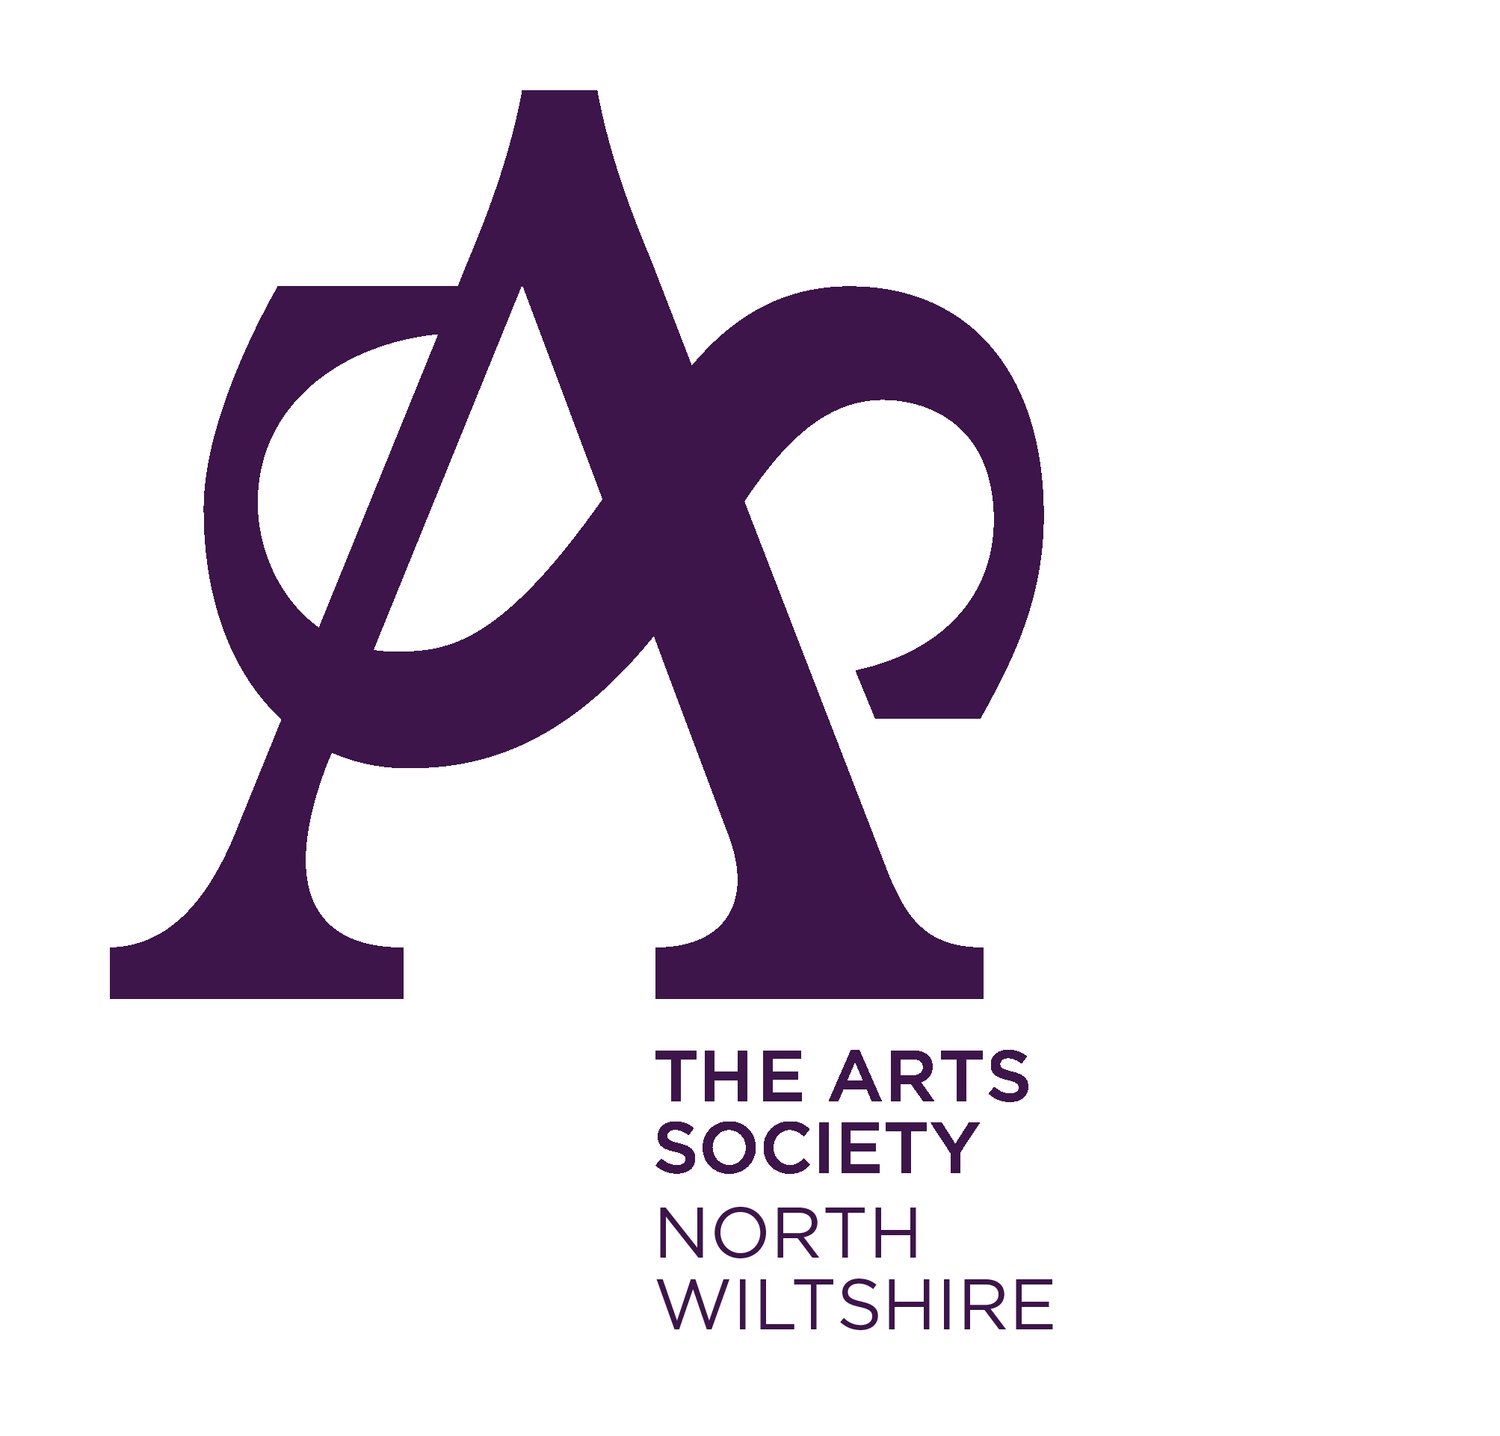 Welcome to The Arts Society North Wiltshire